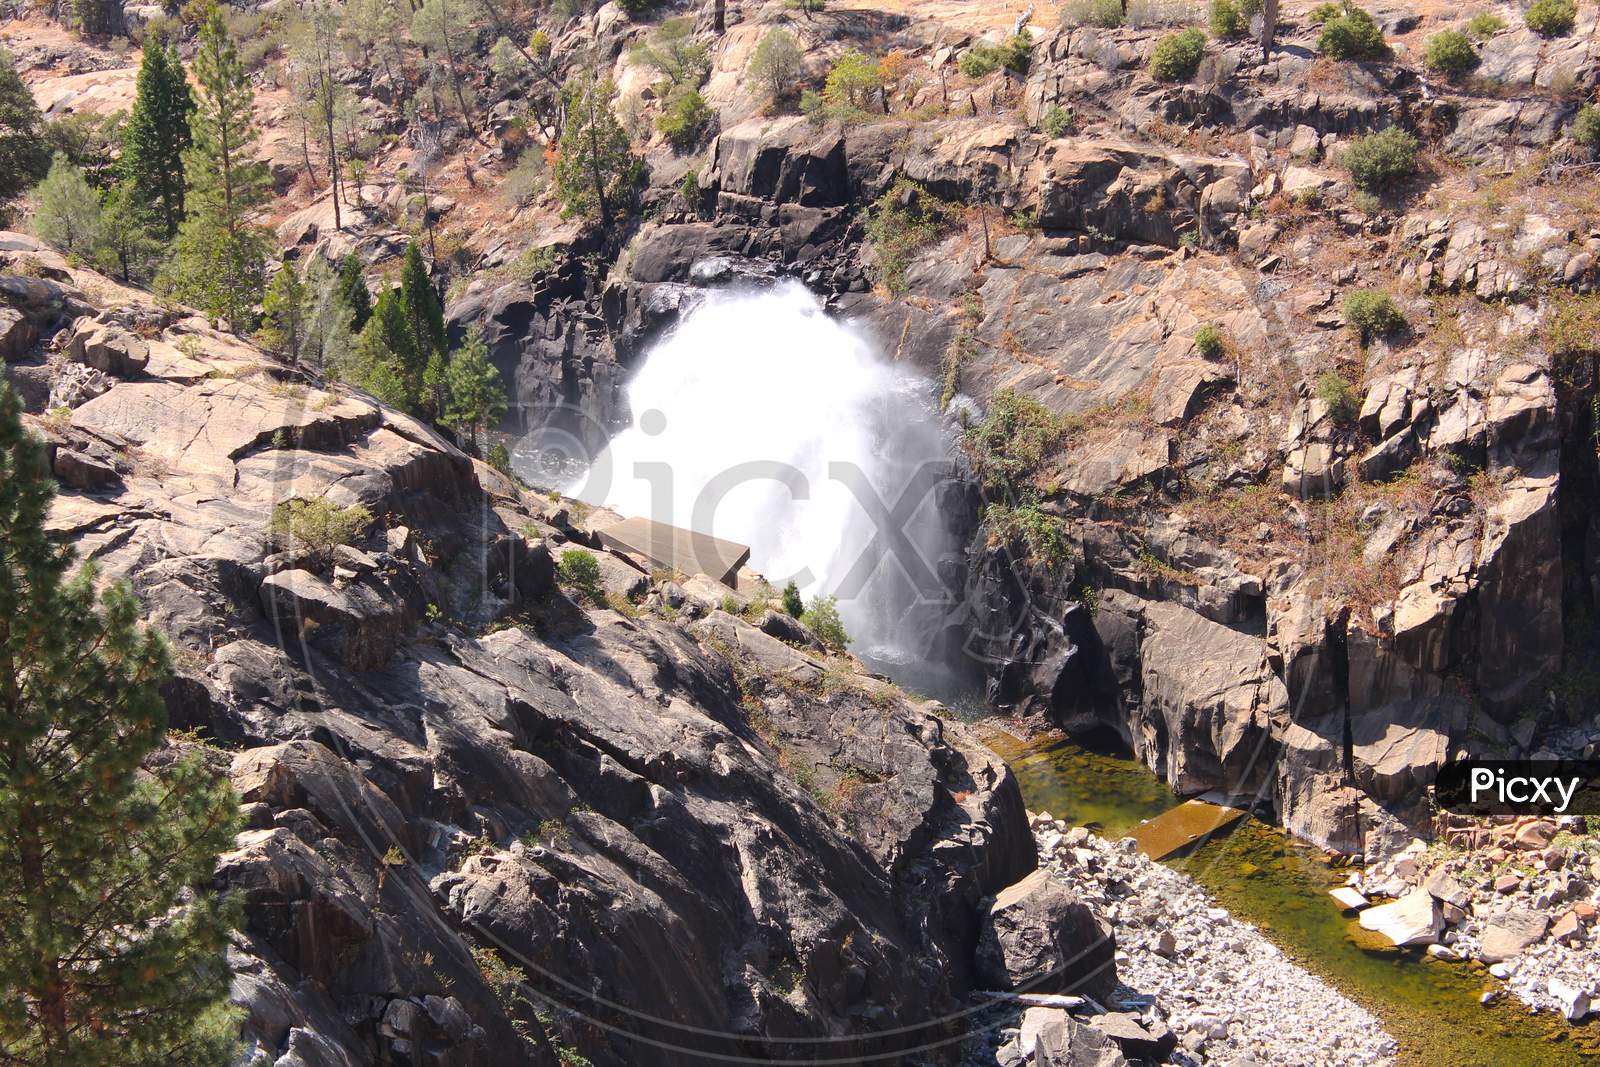 Water Gushing Out From Hetch Hetchy Dam, Yosemite National Park